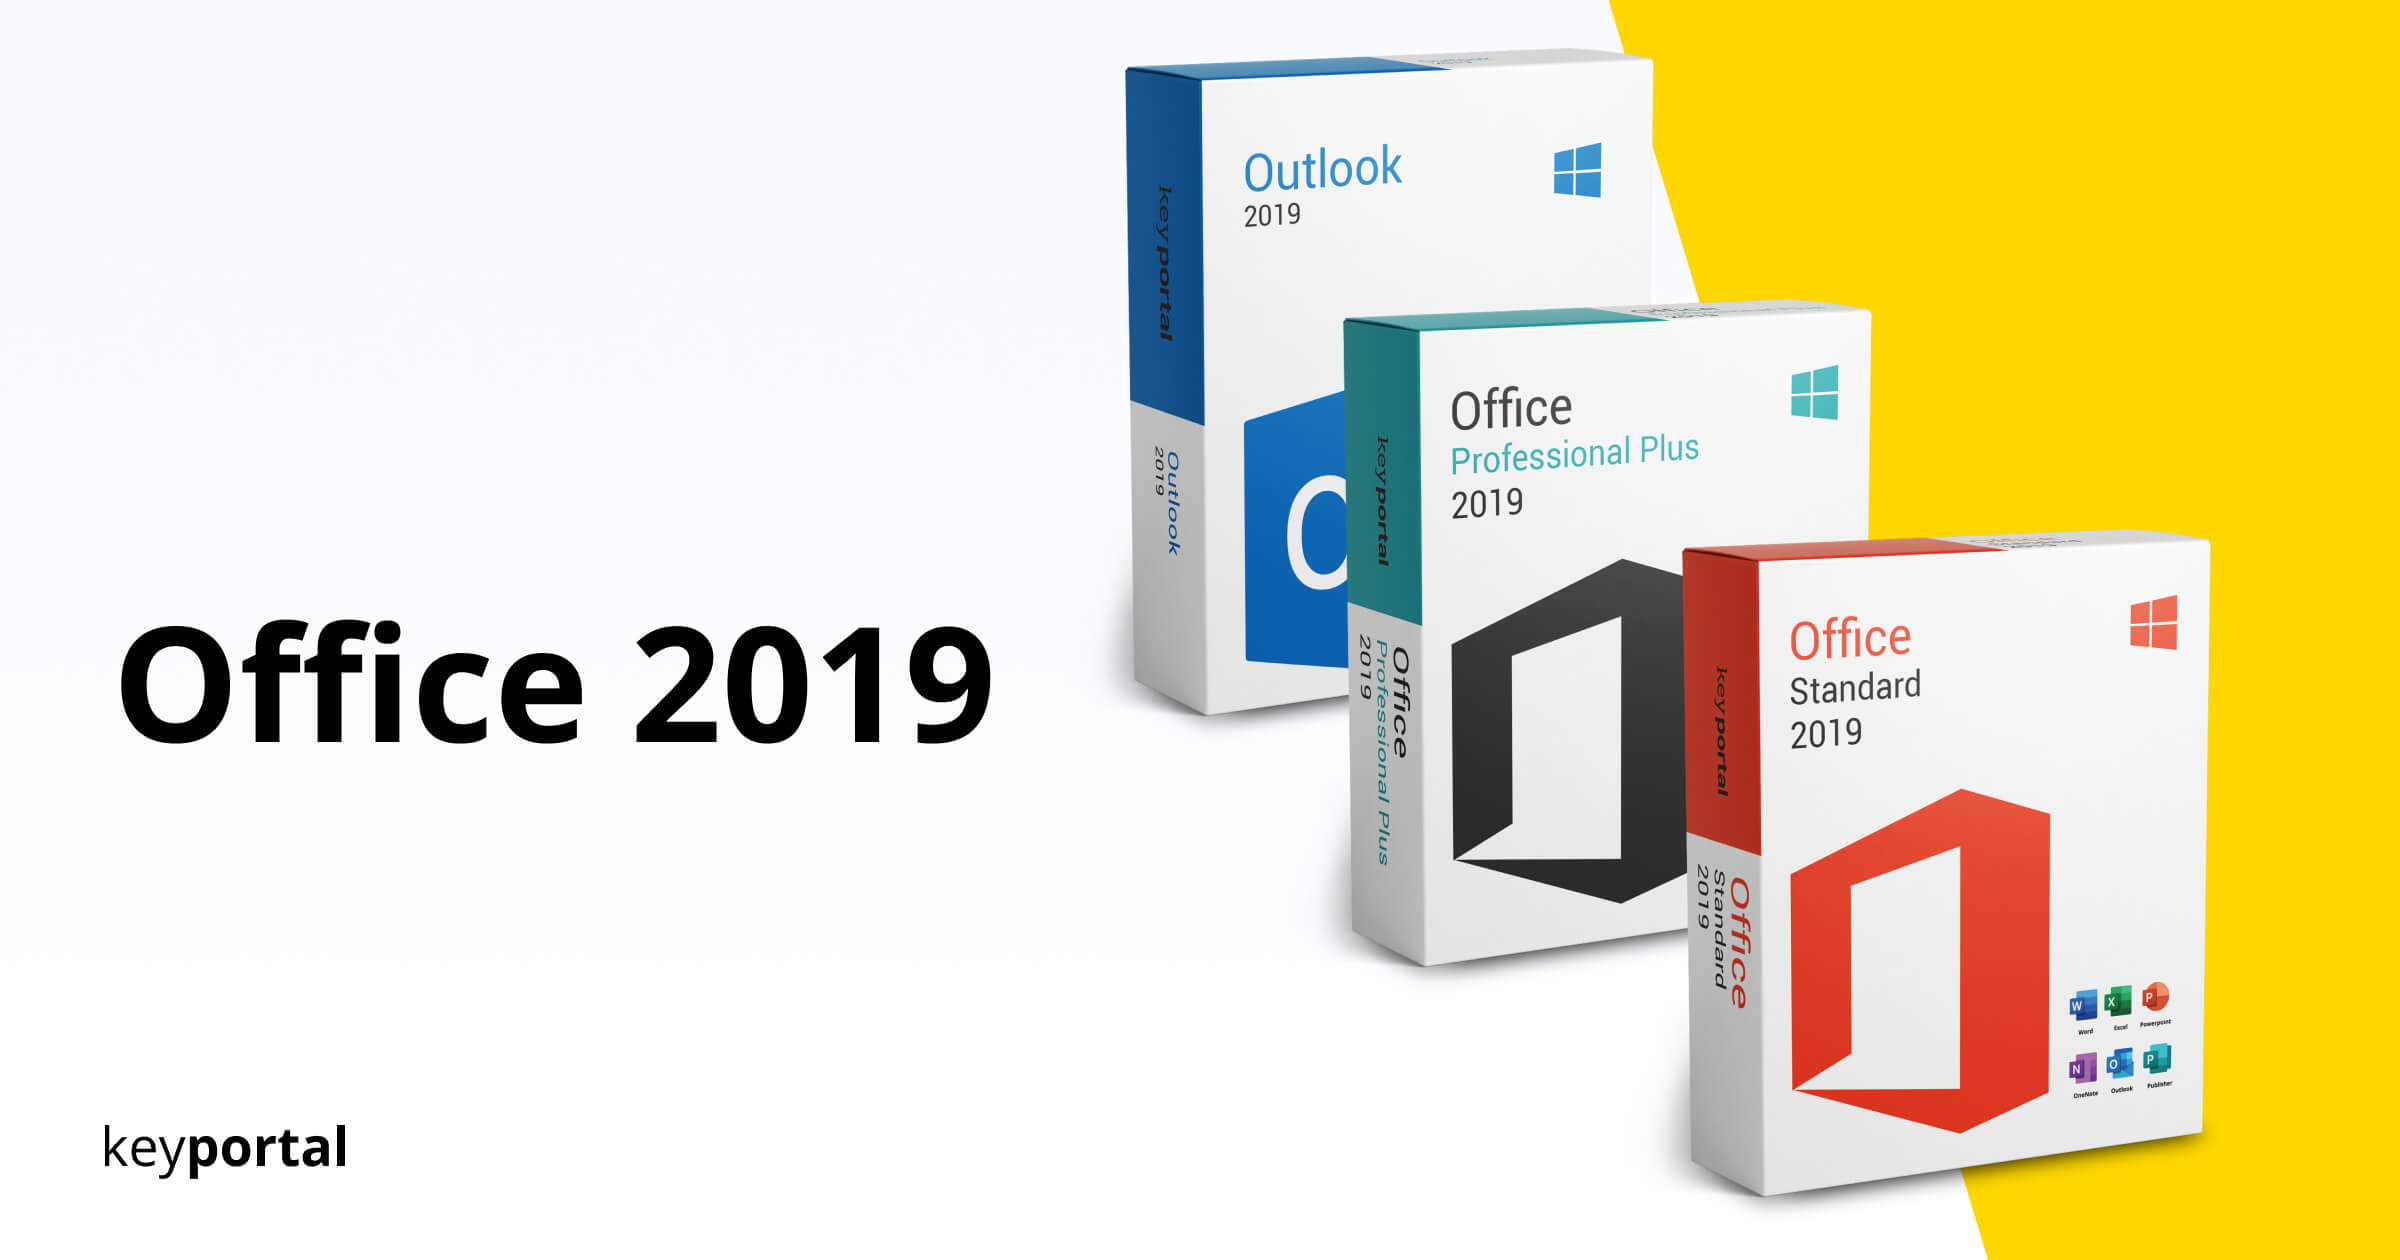 how to add access to office 2019 standard